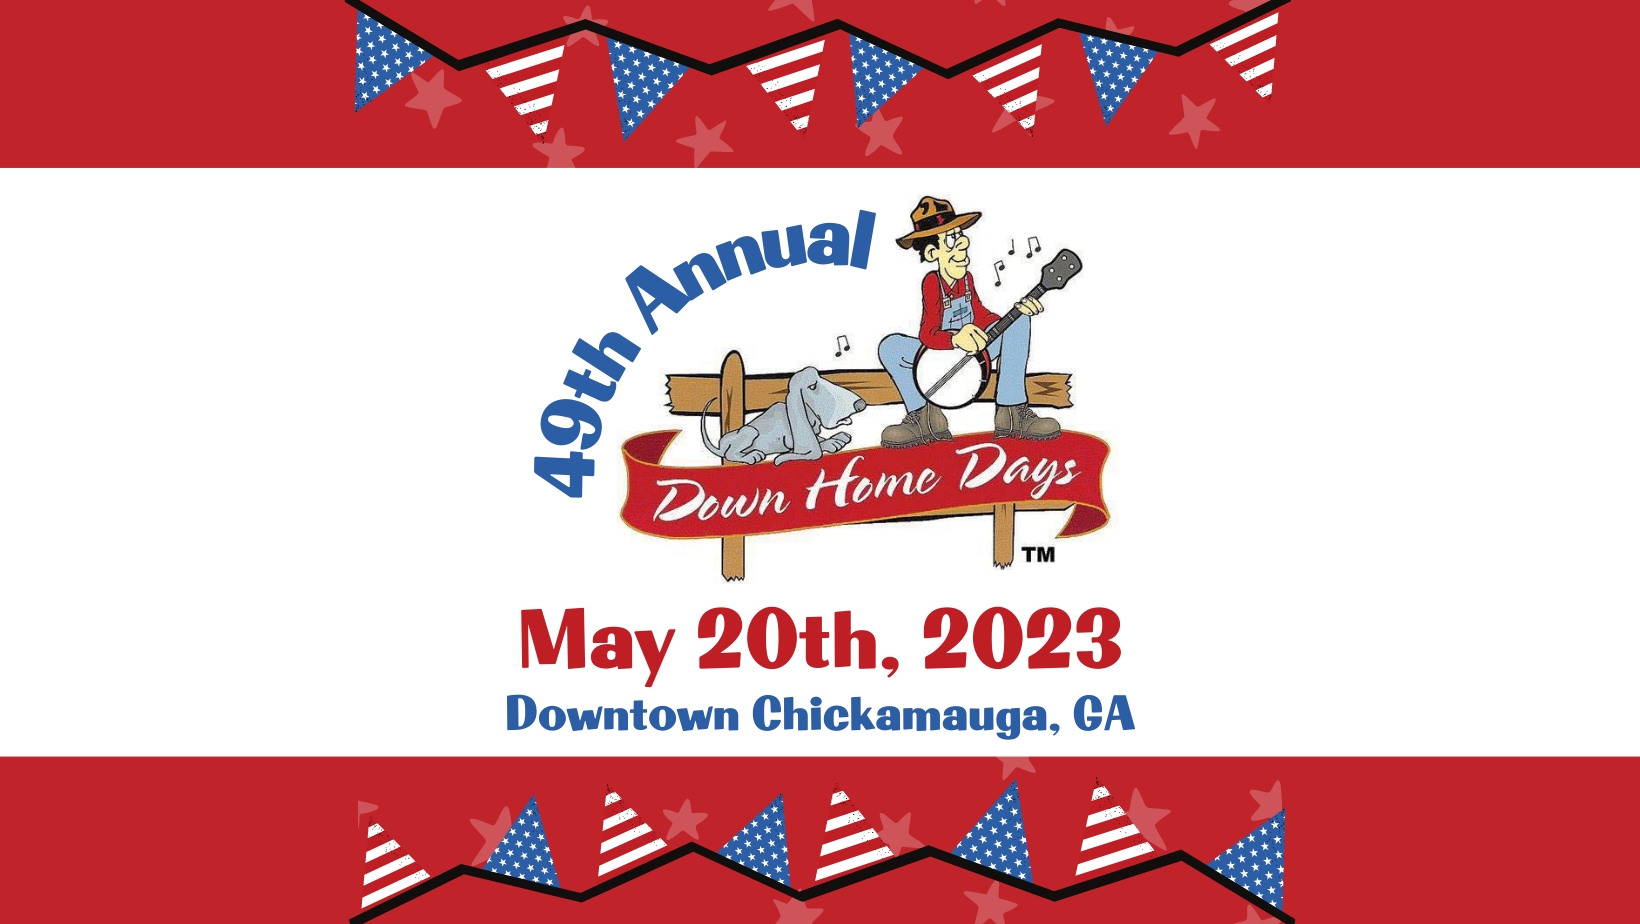 49TH Annual Down Home Days Festival & Craft Show